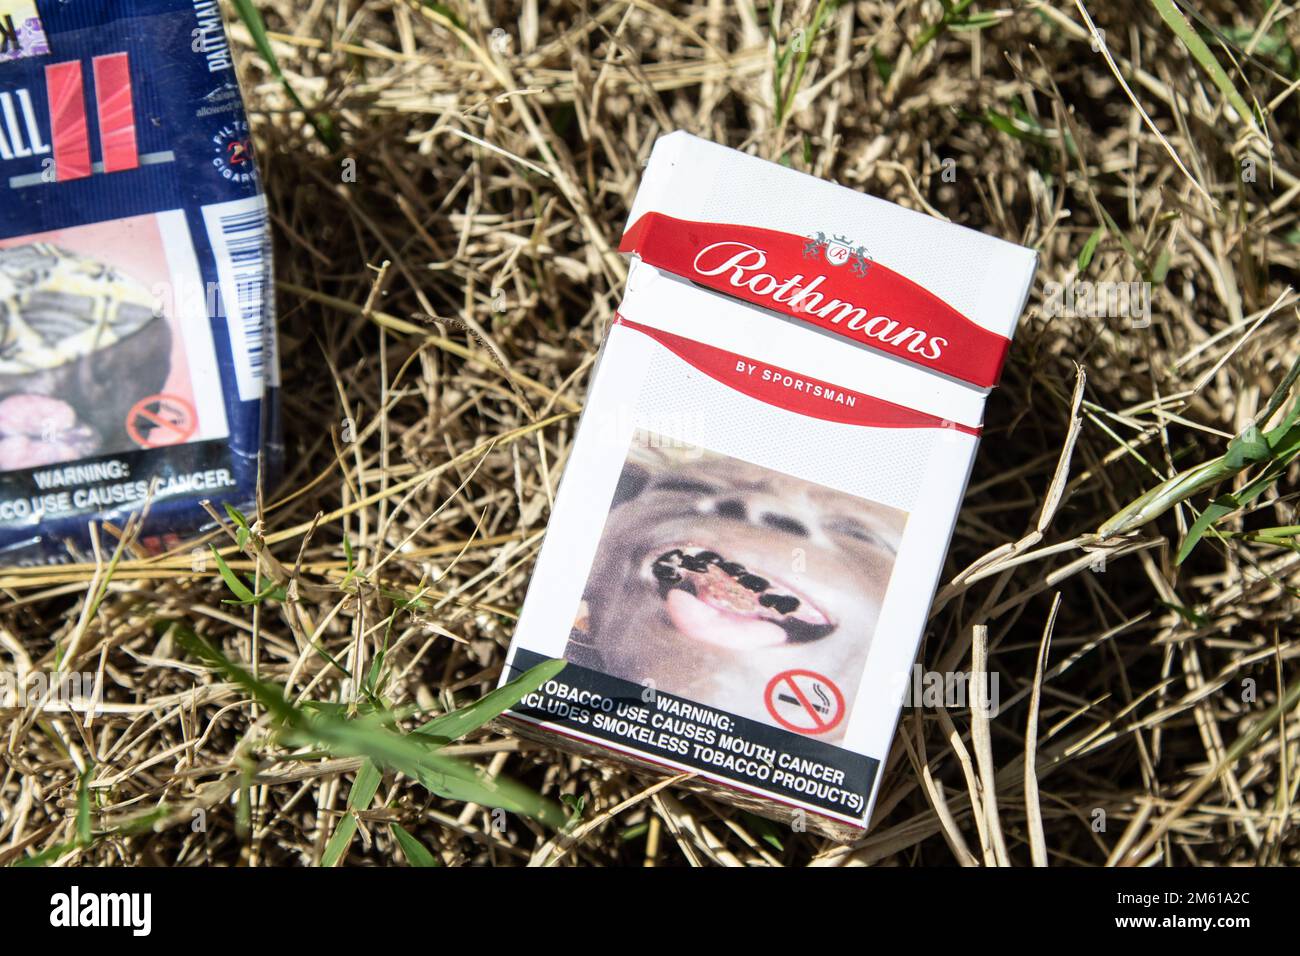 Nakuru, Kenya. 01st Jan, 2023. An empty packet of Rothmans Cigarettes with a health warning written 'Tobacco Use causes mouth cancer' litters the environment near a popular entertainment spot in Nakuru. A study conducted by researchers at California's UC Davis Comprehensive Cancer Center says nearly half of the deaths from 12 cancers are due to tobacco use. (Photo by James Wakibia/SOPA Images/Sipa USA) Credit: Sipa USA/Alamy Live News Stock Photo